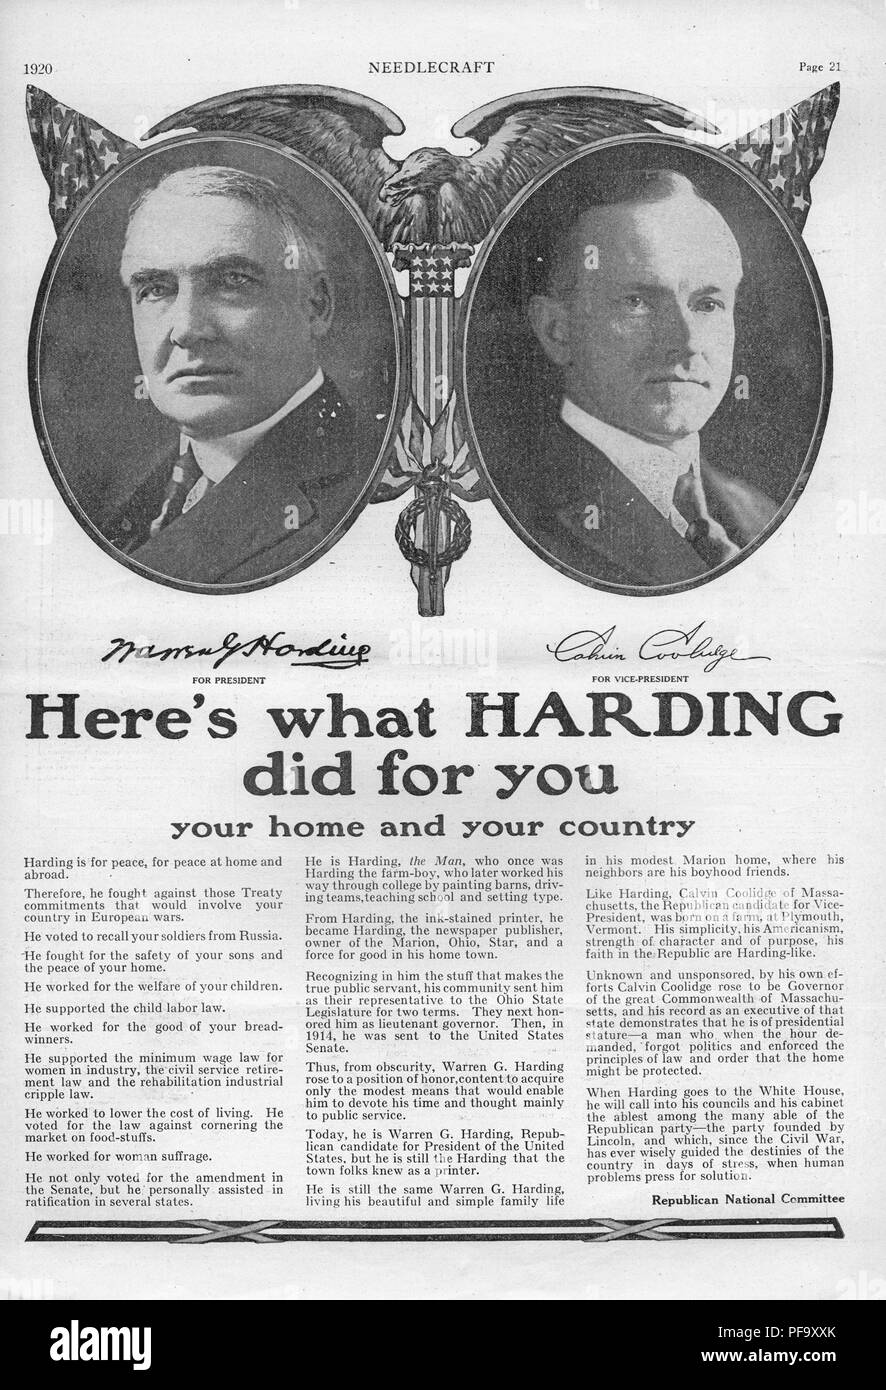 Presidential campaign advertisement for the Republican team of Warren G Harding and Calvin Coolidge, with black and white portrait photographs of each candidate, intended to appeal to the newly enfranchised female voter by noting their support for suffrage, titled 'Here's what Harding did for you, your home, and your country, ' published by Needlecraft for the American market, 1920. () Stock Photo